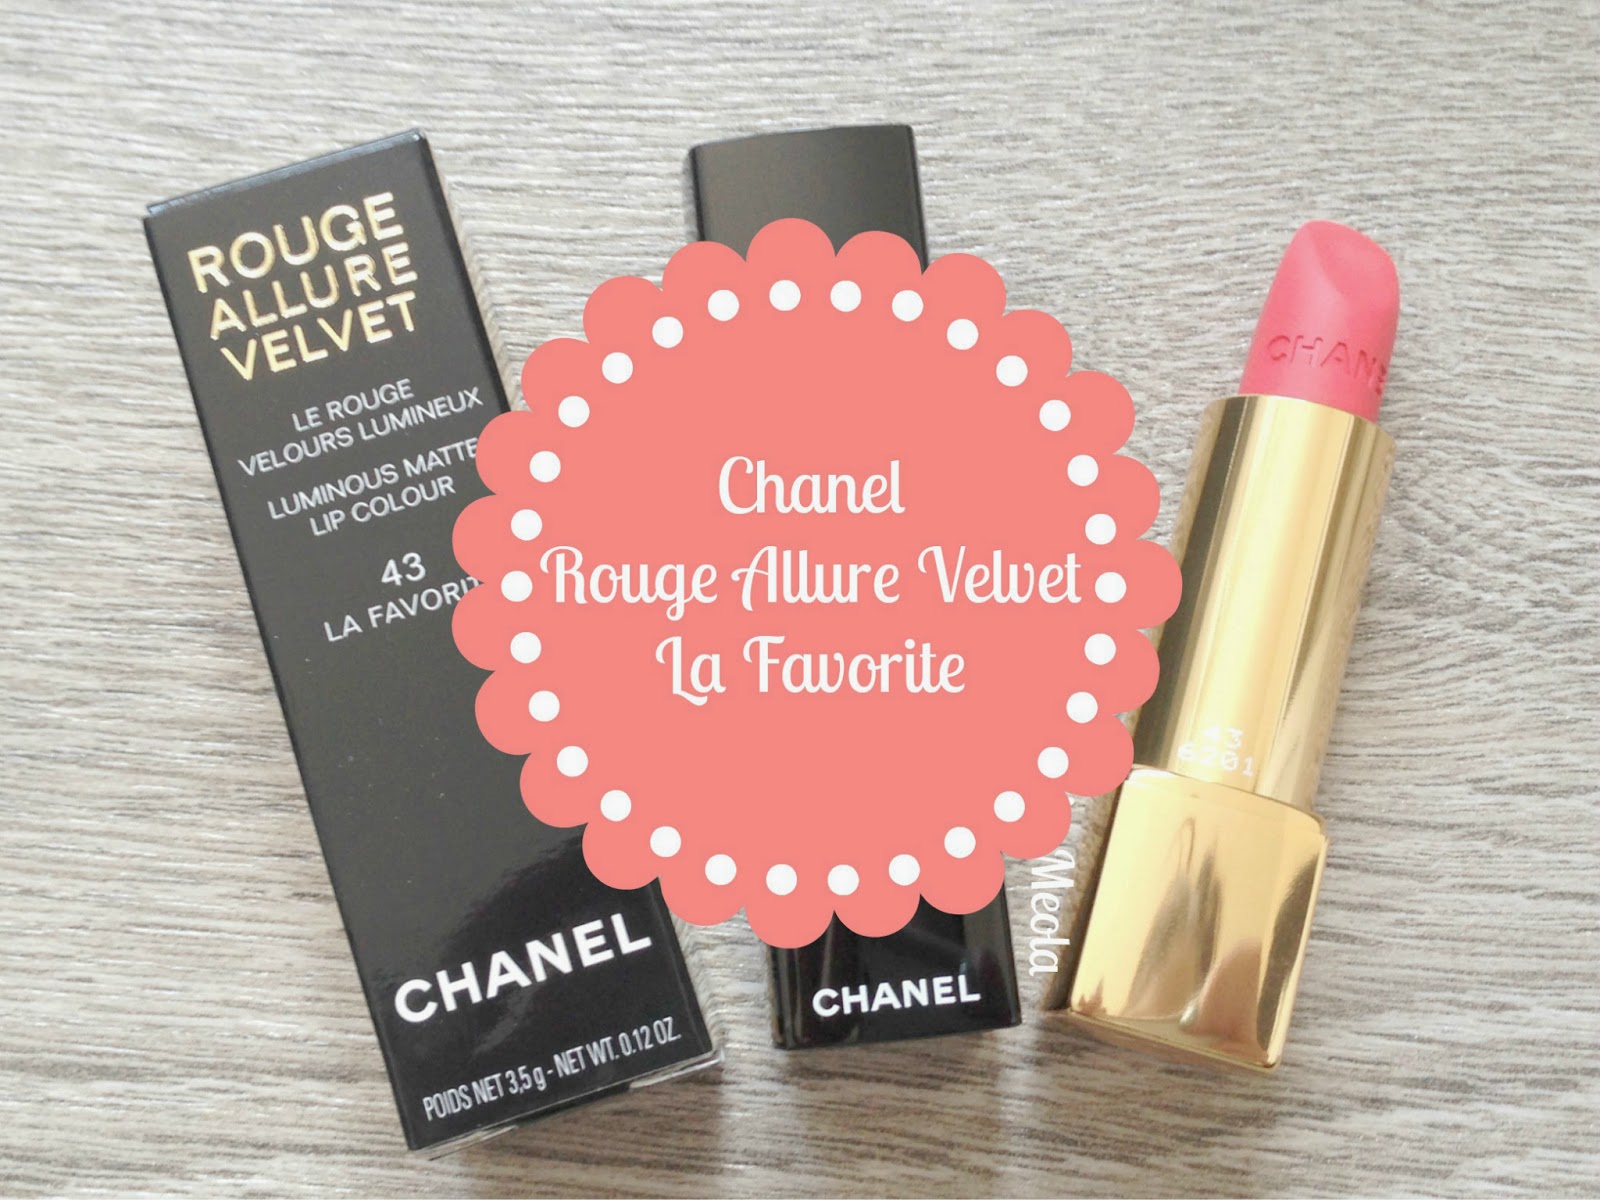 Chanel 31 Le Rouge lipstick review: I wore the new £140 Chanel